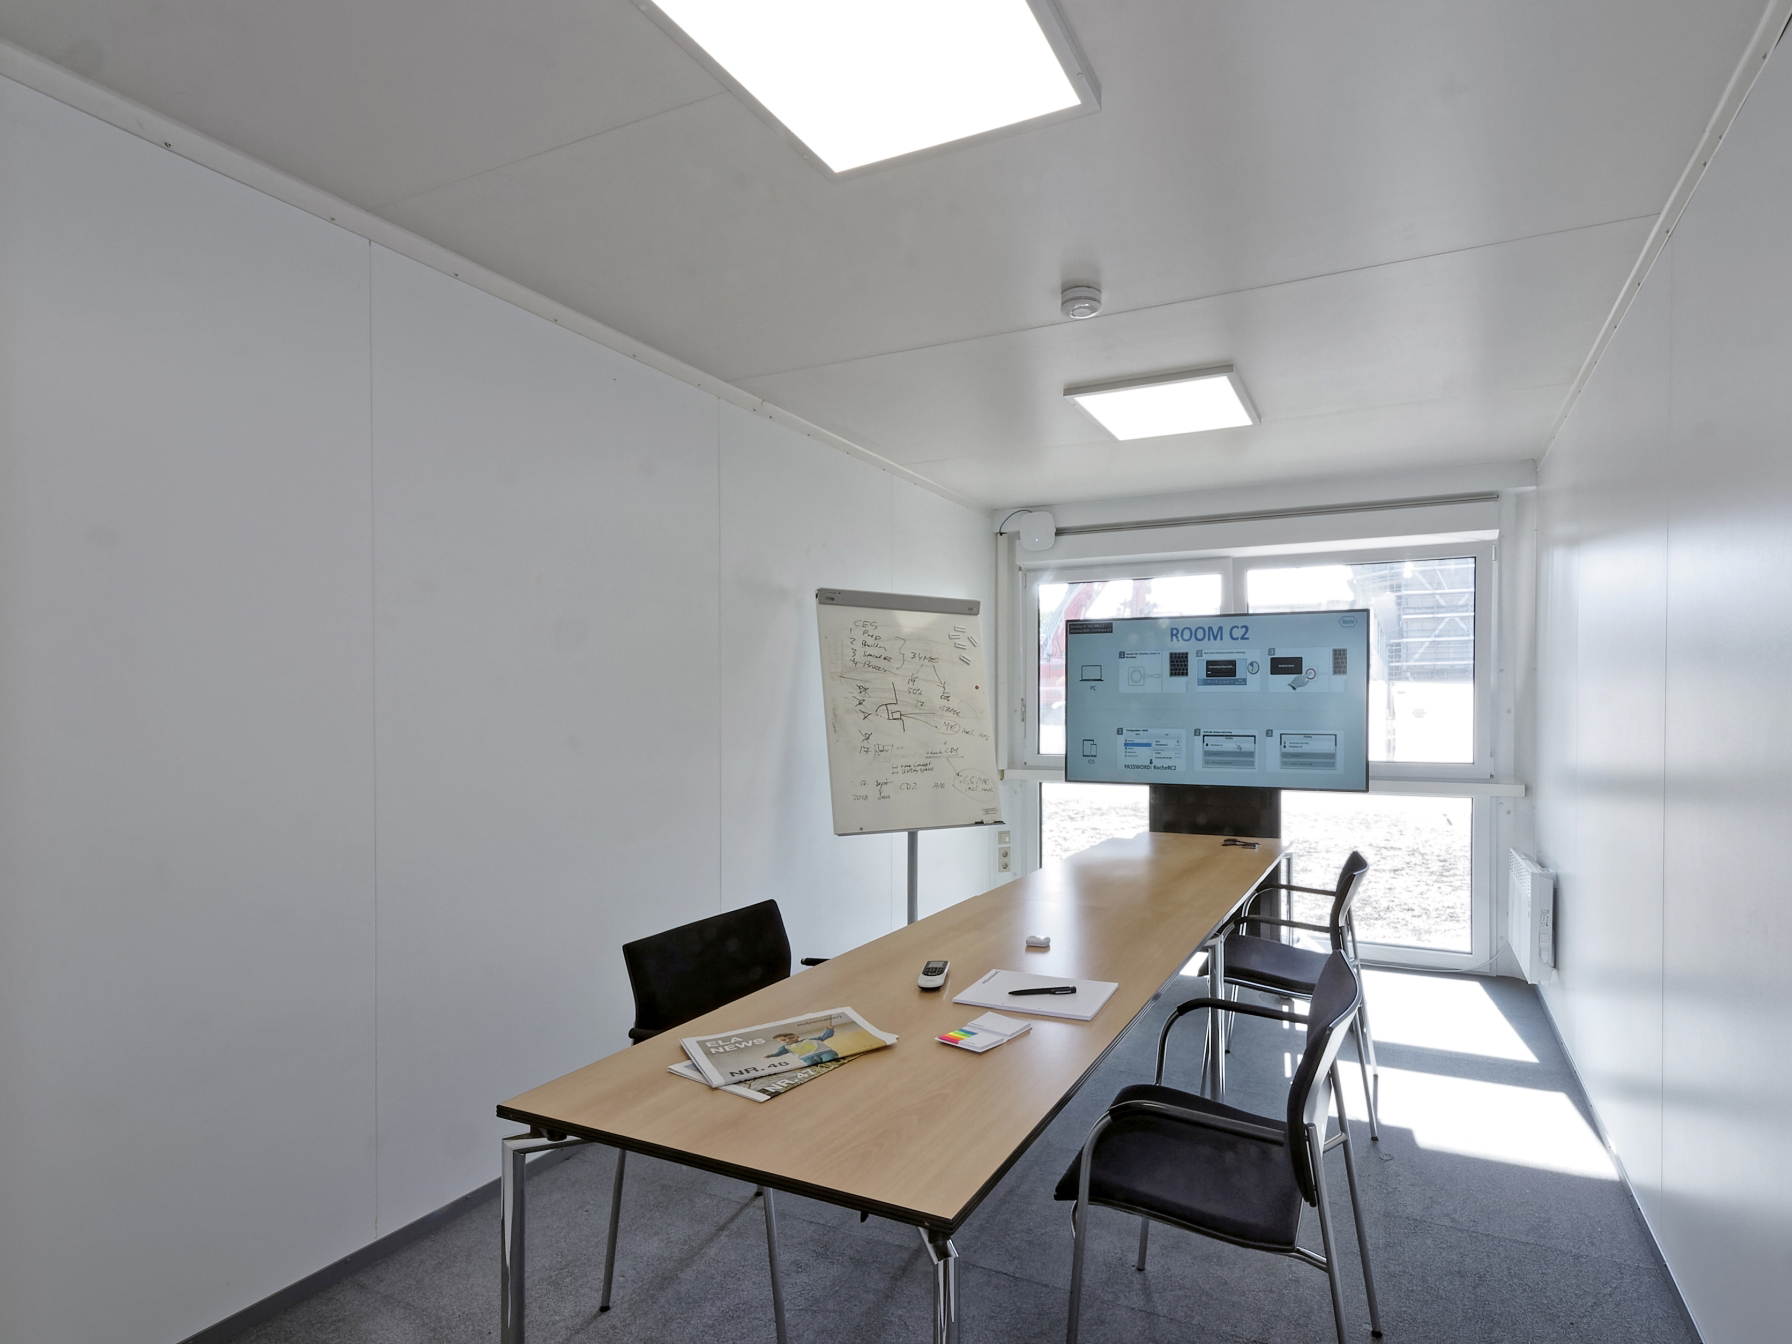 The functional meeting rooms on the ground floor of the ELA facility were ready for immediate occupancy.